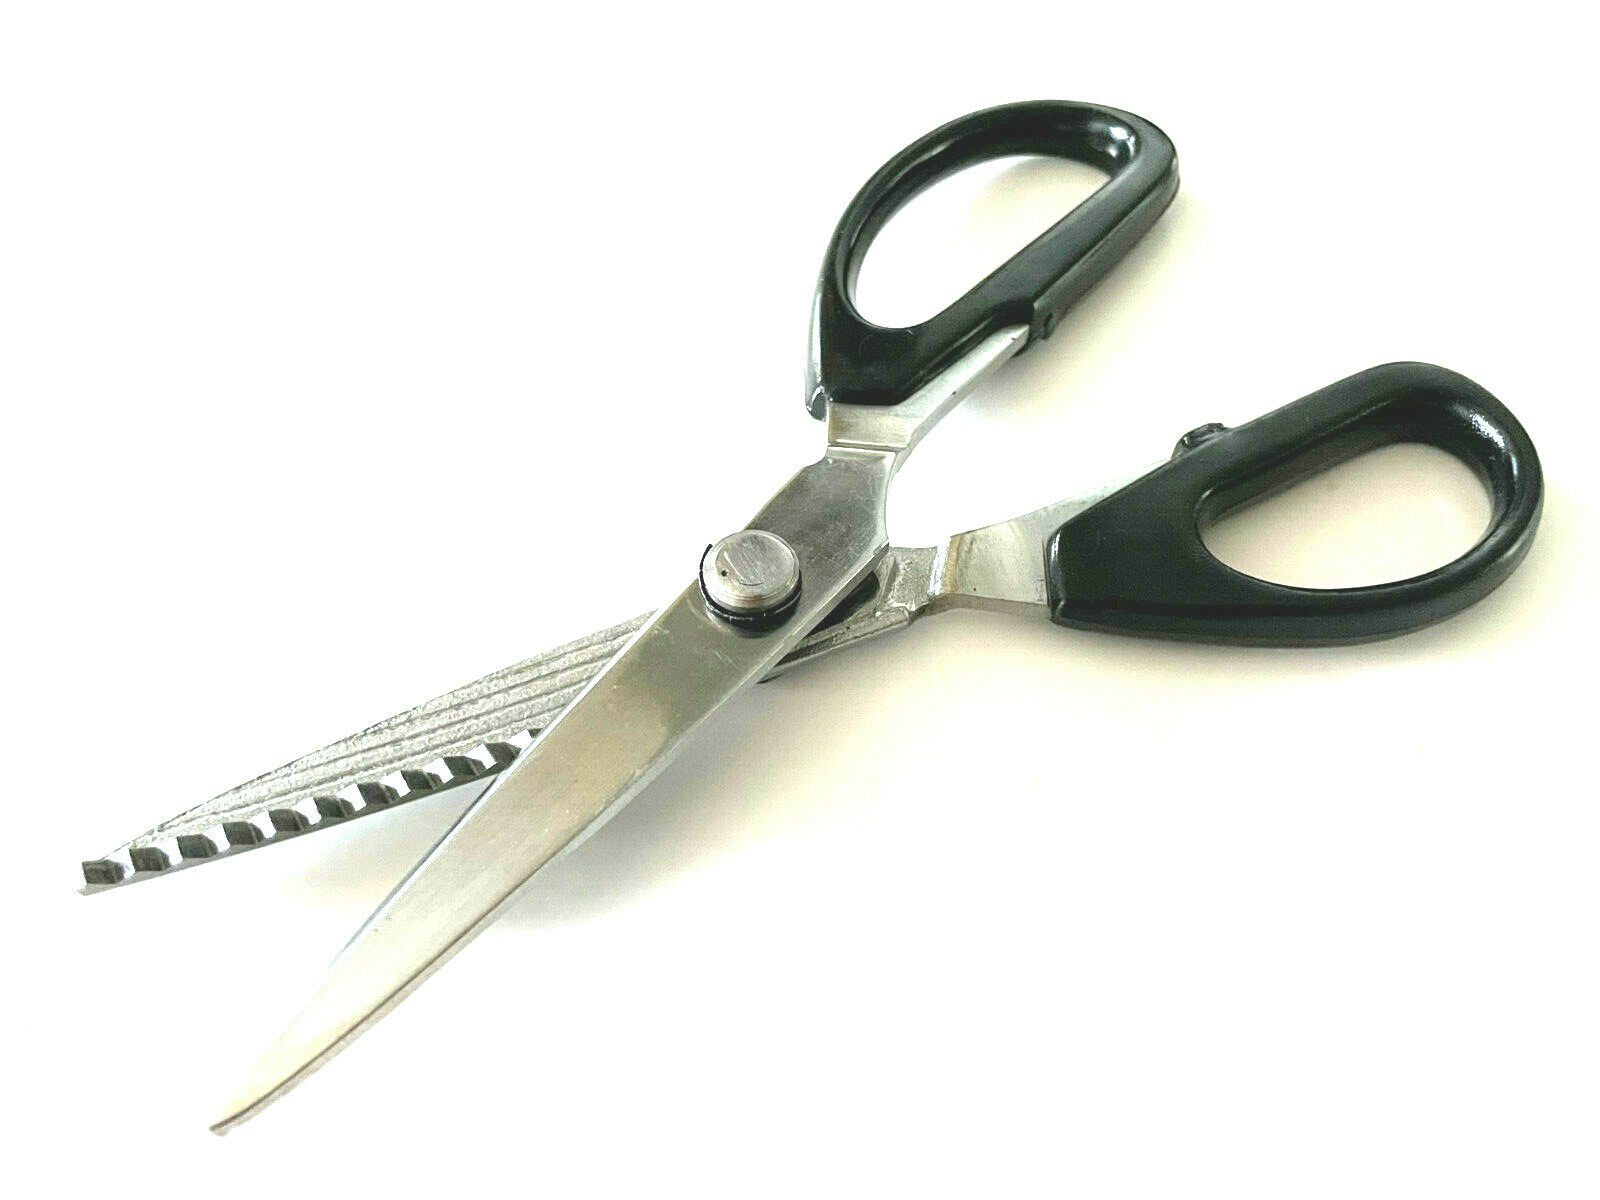 Heavy Duty All Metal Stainless Steel Shears Craft Scissors Tailor